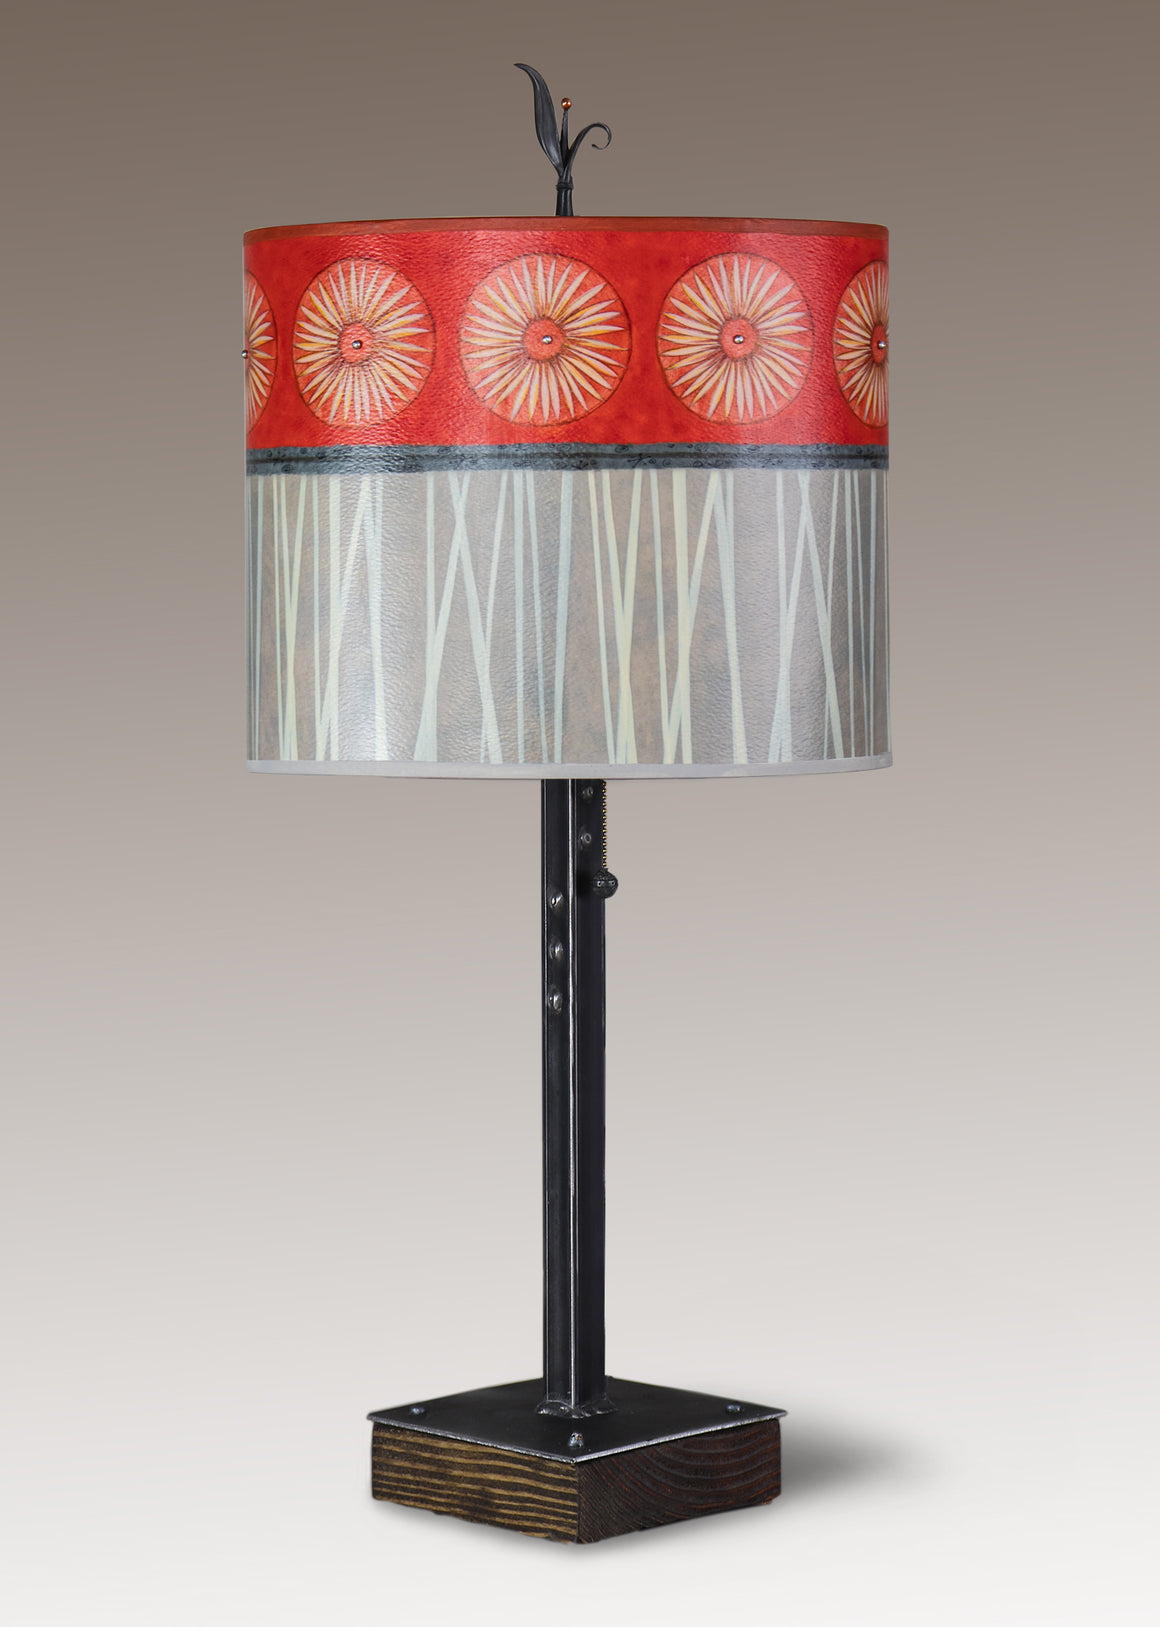 Steel Table Lamp on Wood with Large Oval Shade in Tang